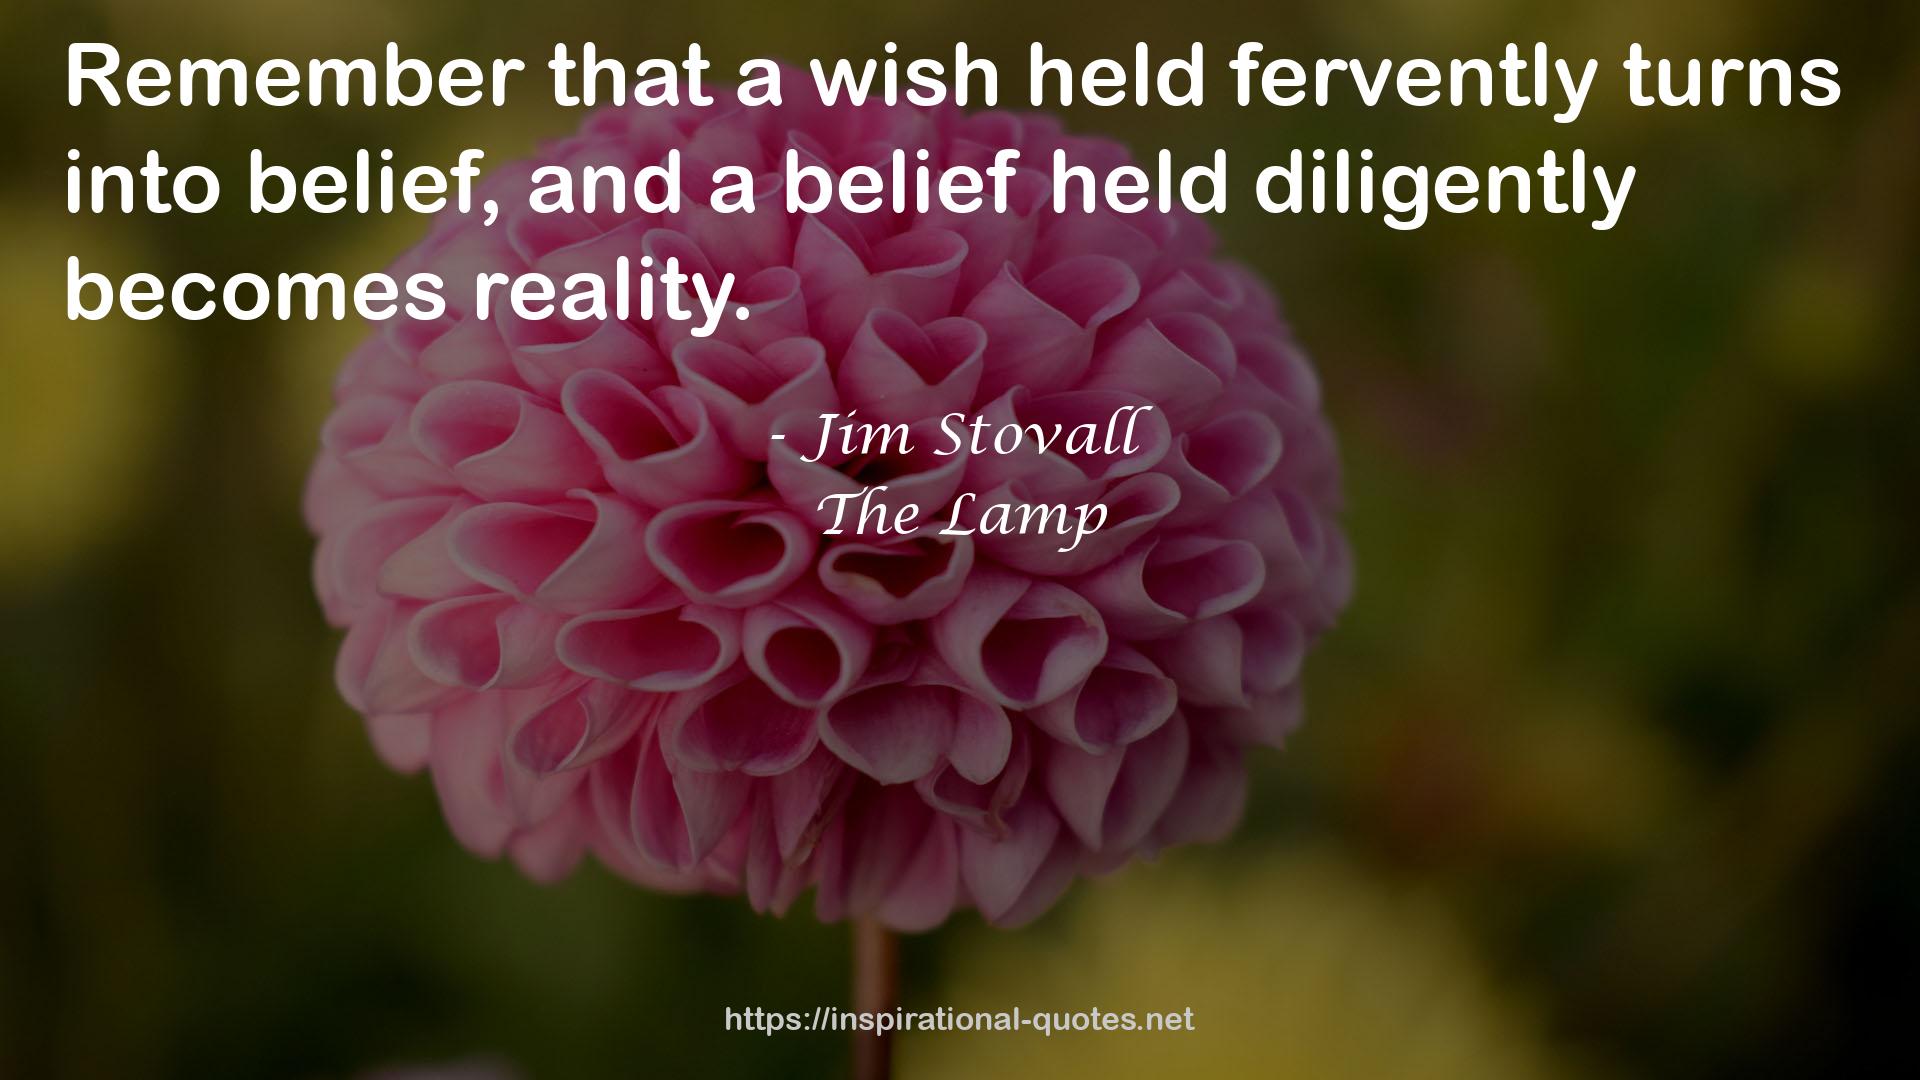 Jim Stovall QUOTES